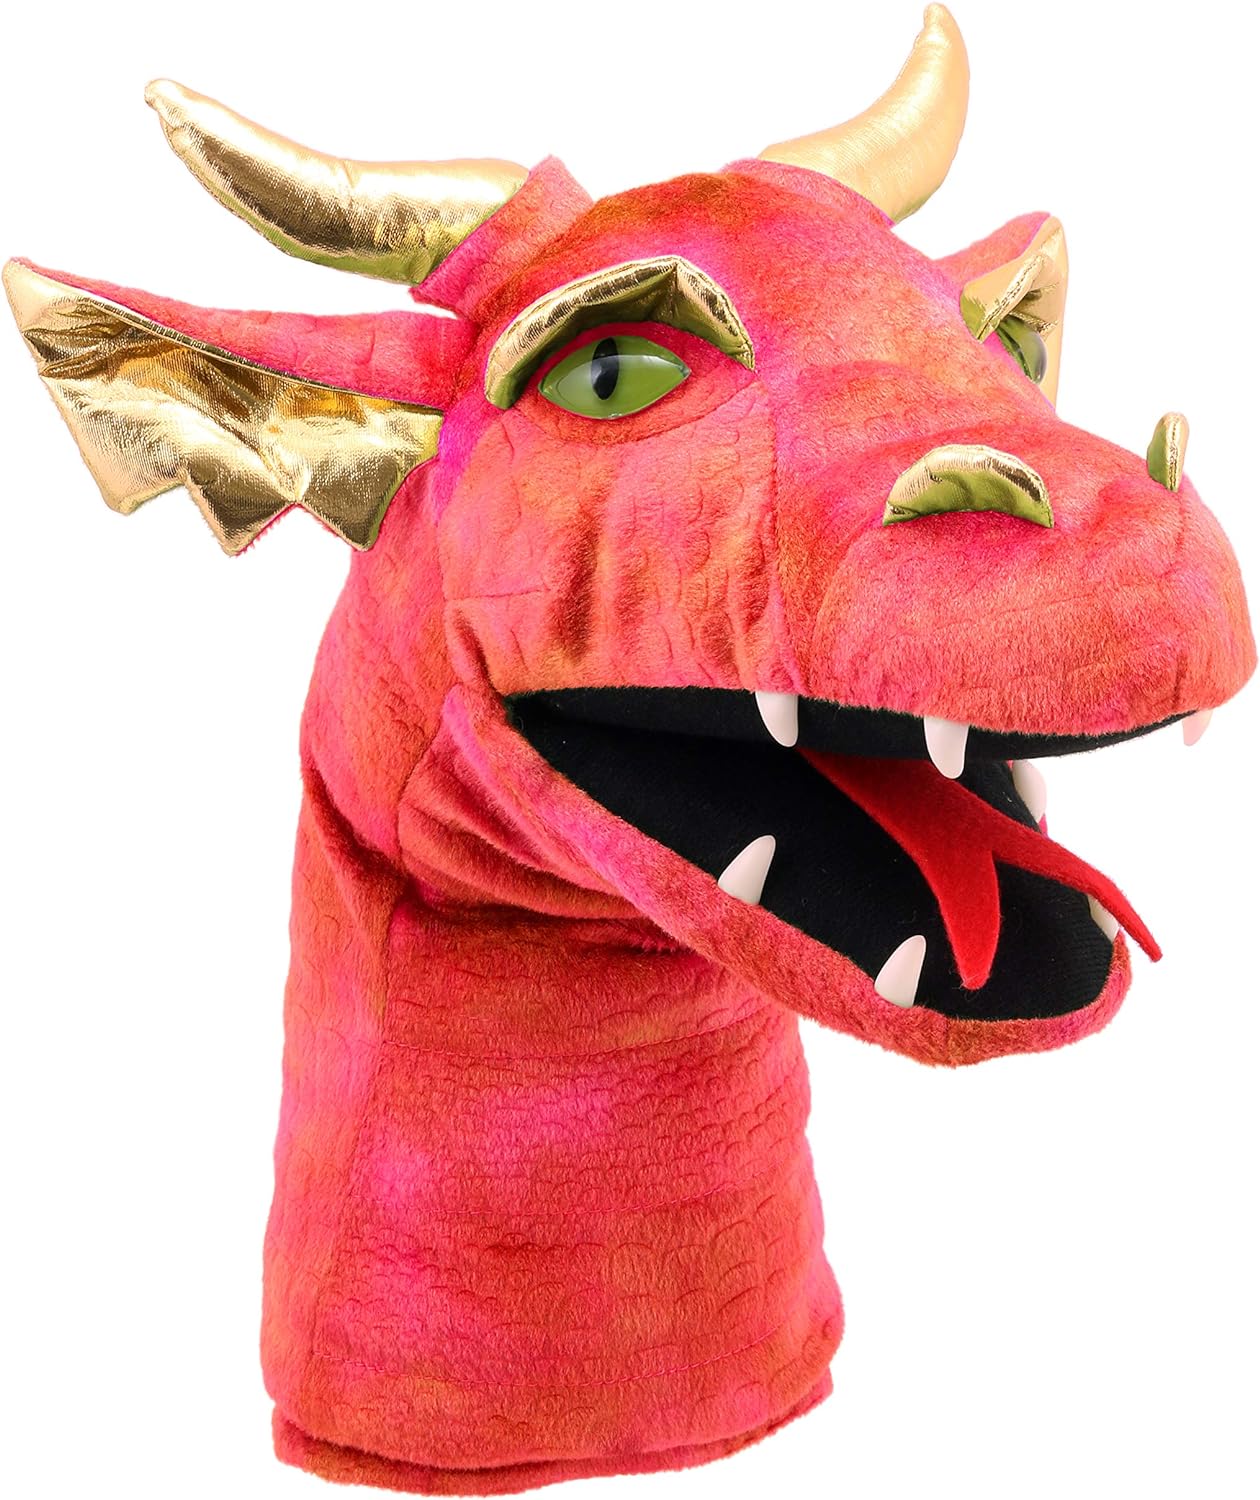 Large Dragon Heads - Red Dragon Hand Puppet